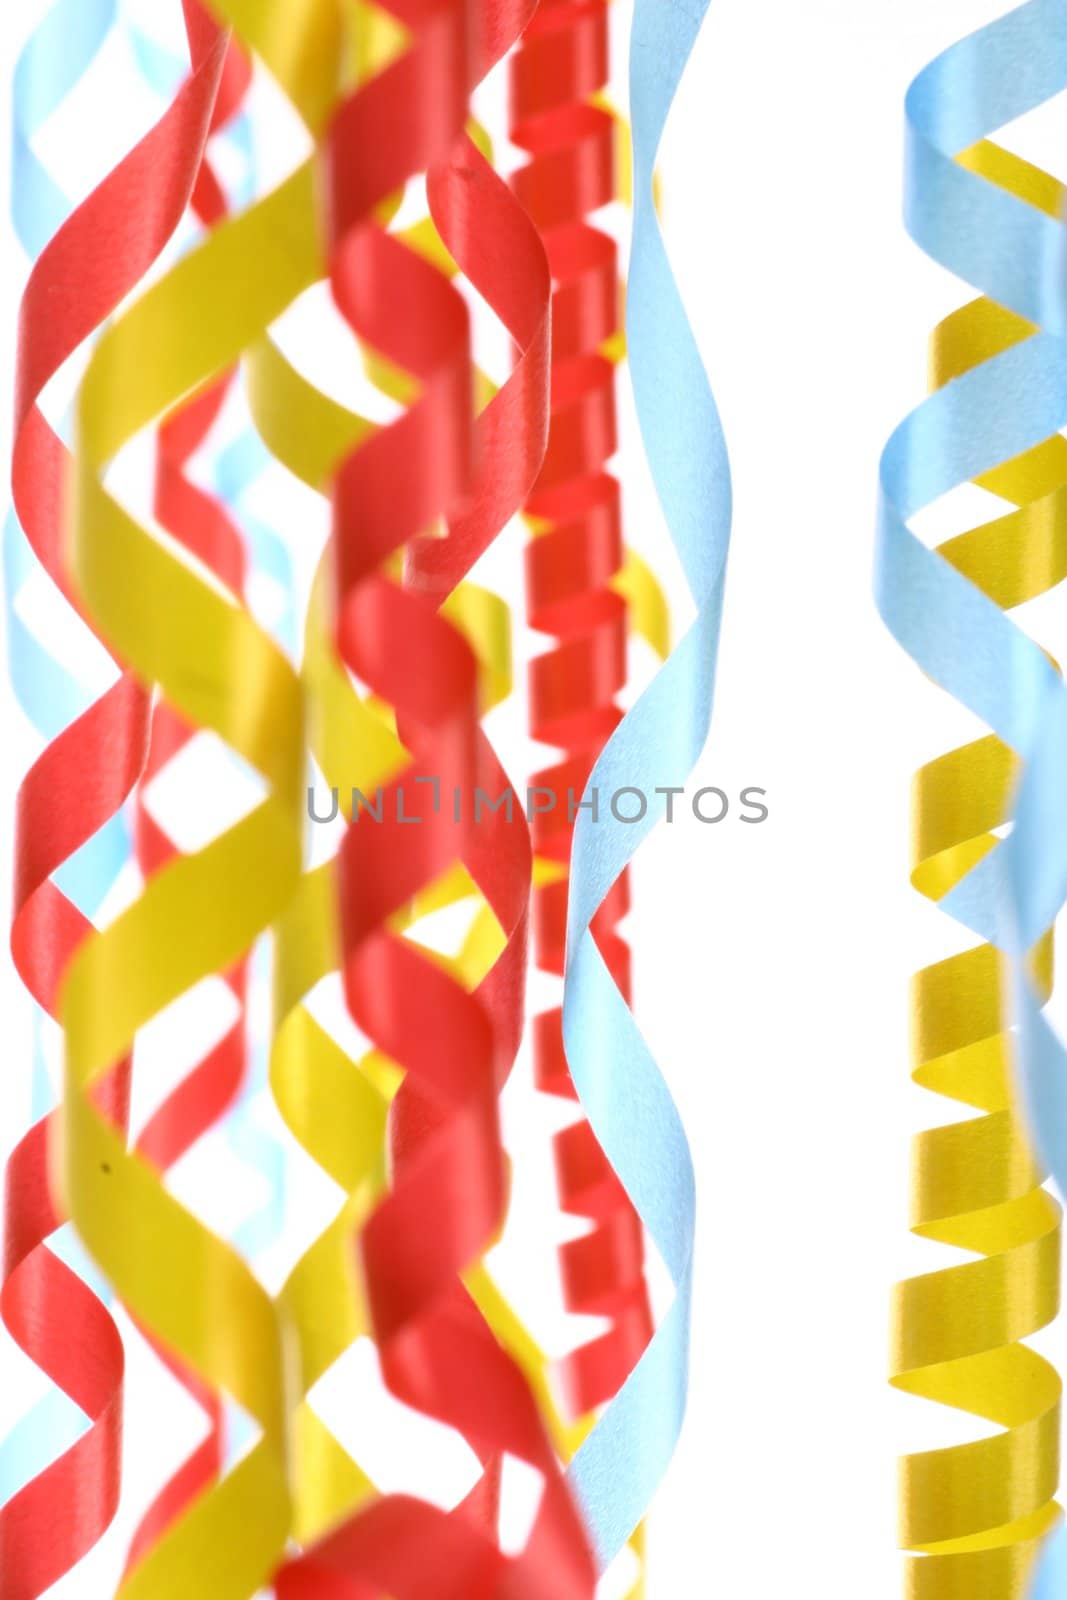 color ful ribbons on white back ground